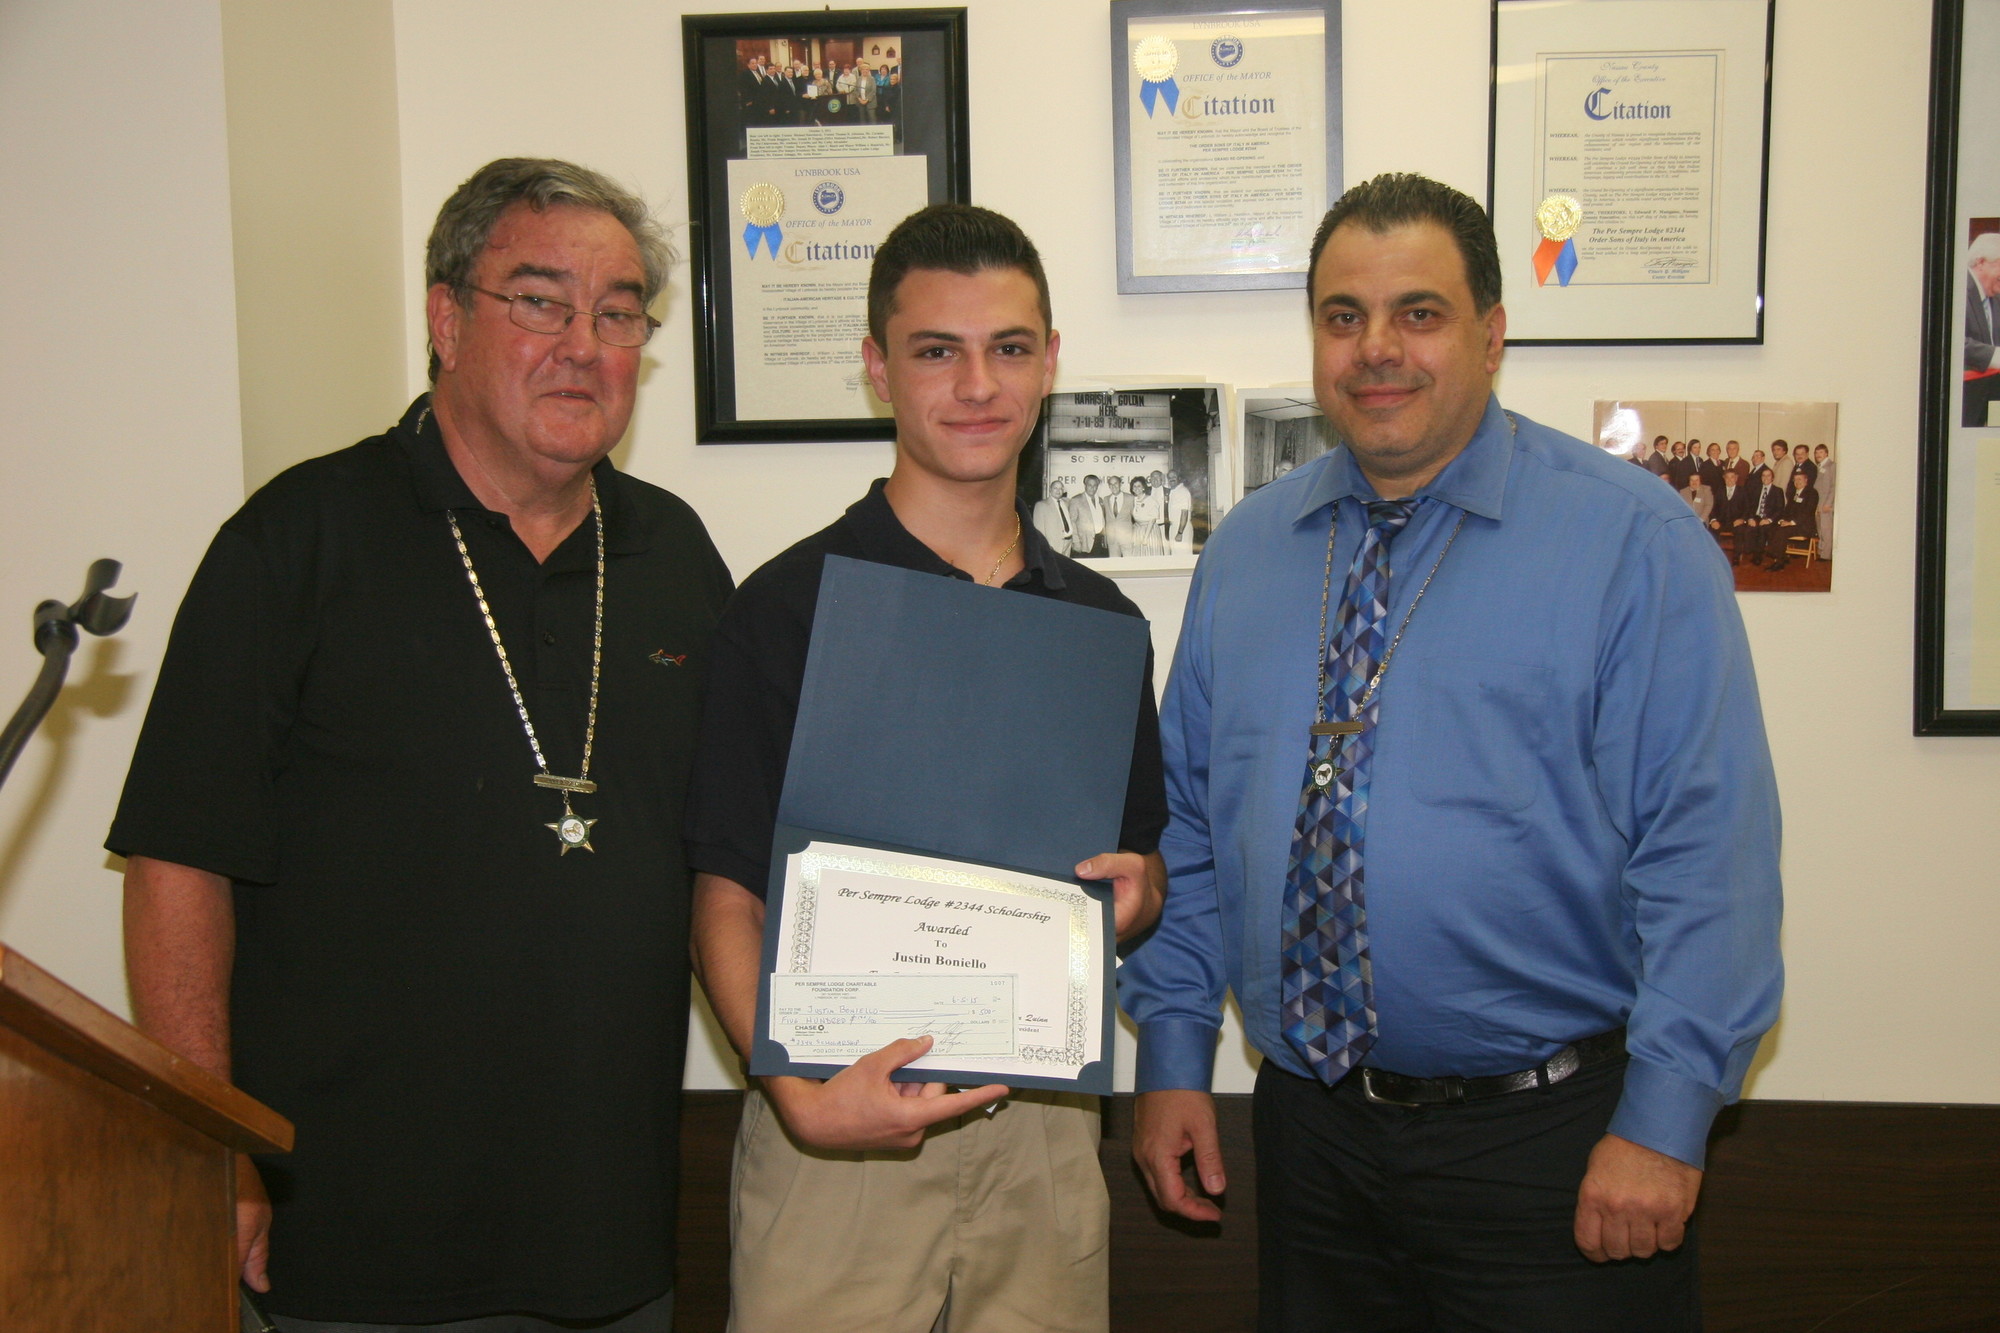 The lodge’s president, John Quinn, left, and First Vice President Gerardo Filippone, right, congratulated student Justin Boniello on being presented with his merit scholarship.